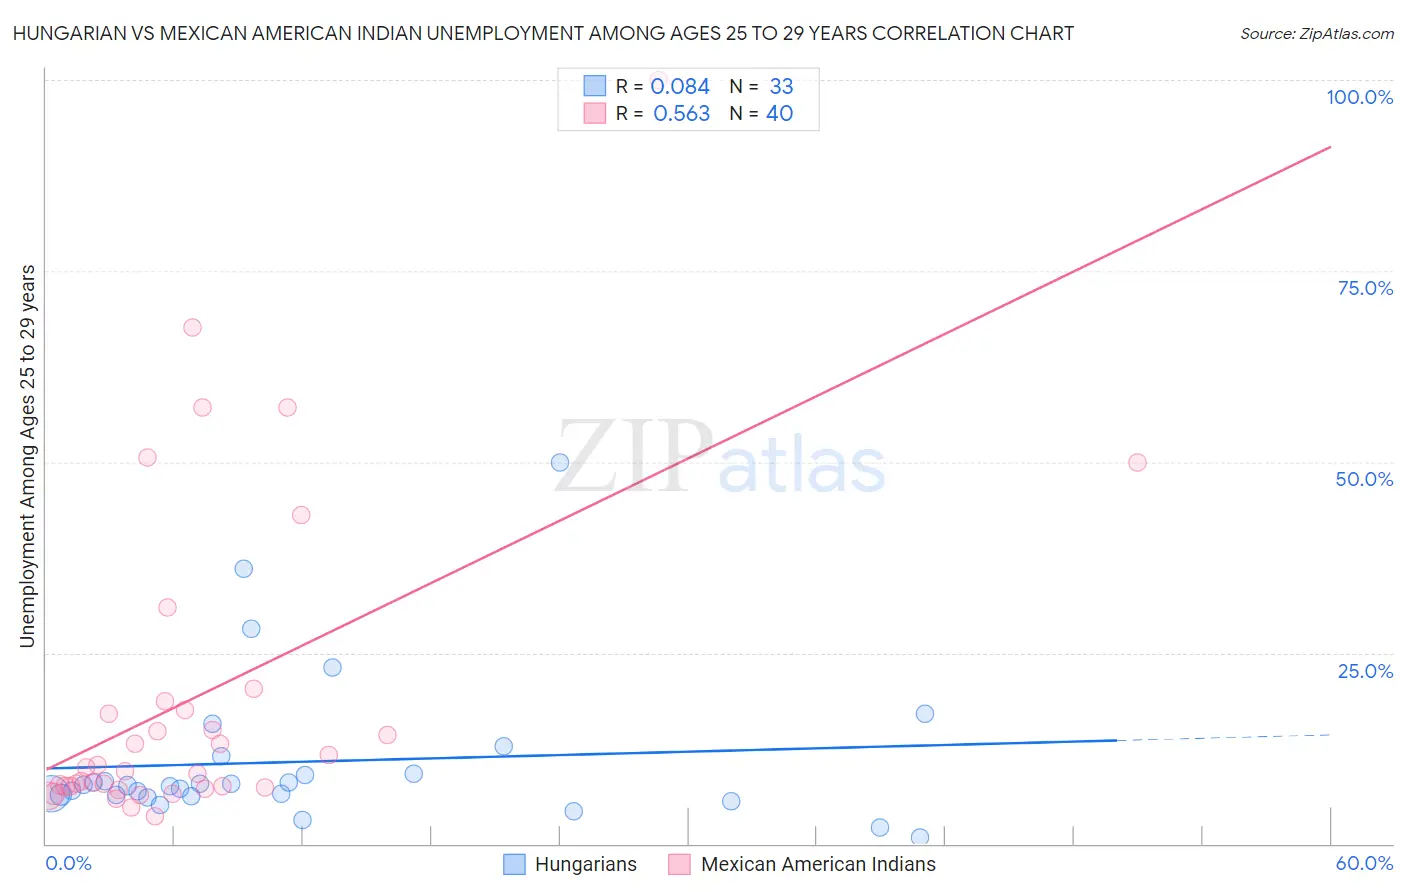 Hungarian vs Mexican American Indian Unemployment Among Ages 25 to 29 years